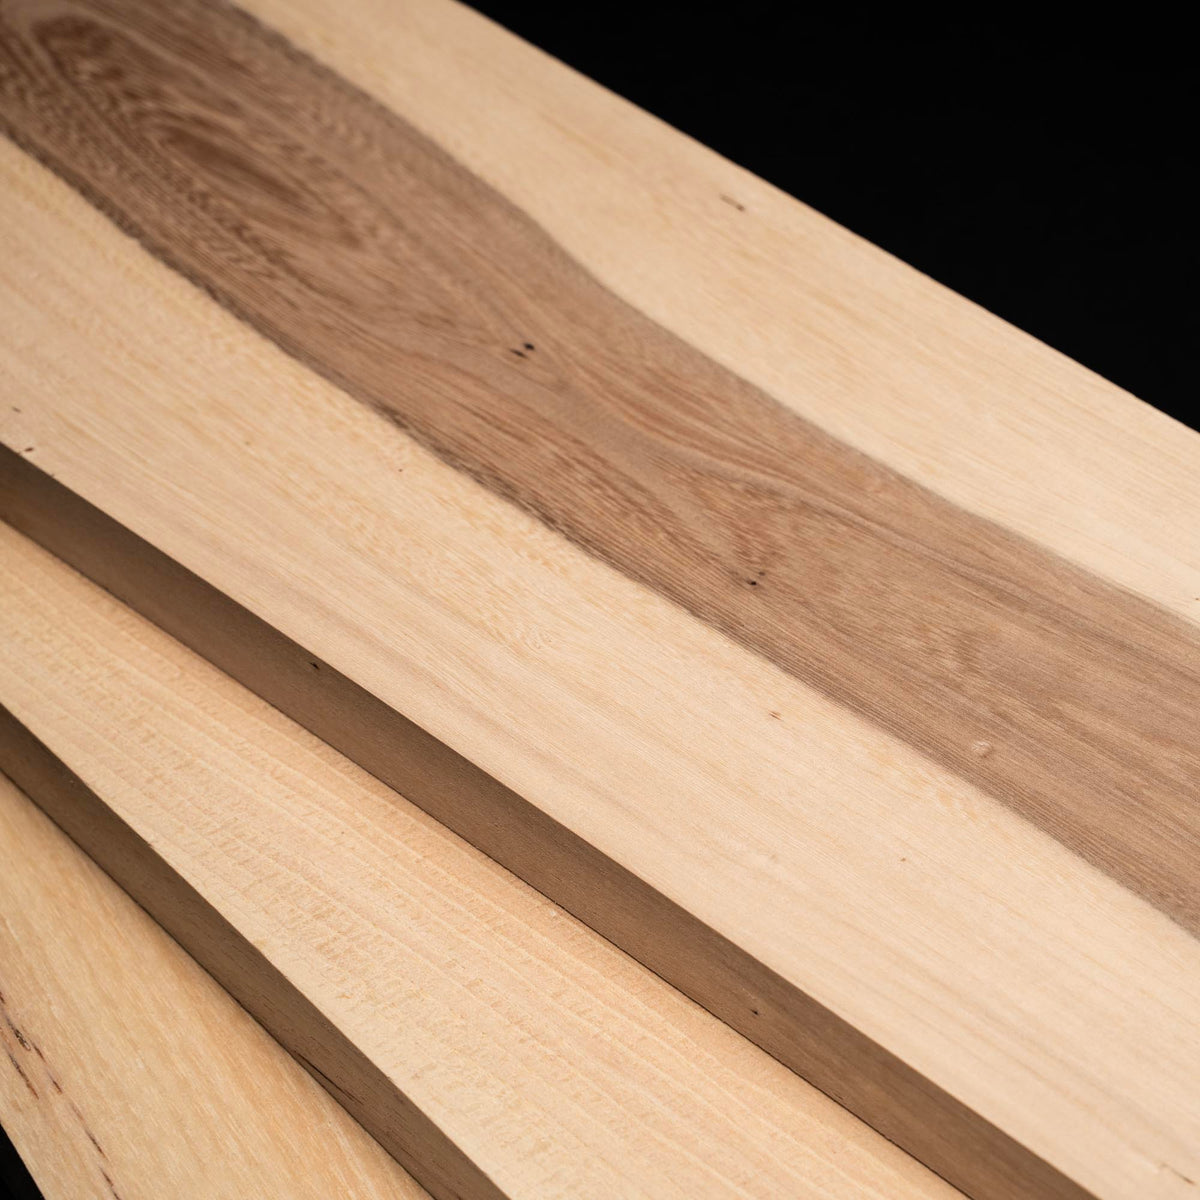 4/4 1&quot; HICKORY Lumber Pack, S3S Clear/Select Boards - Kiln Dried - Packs of 10, 50, 100 Board Feet